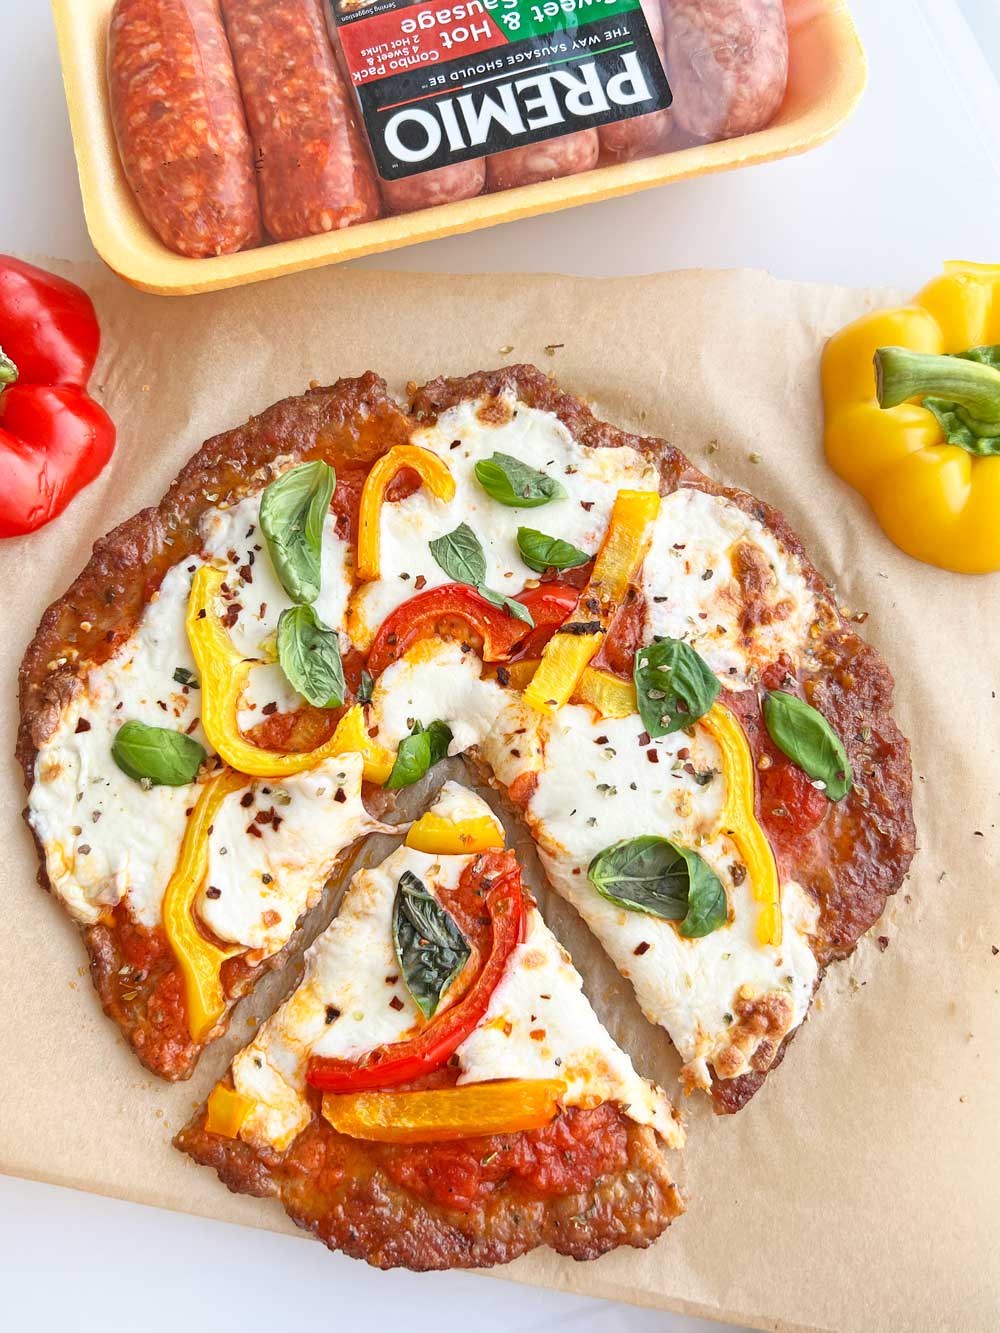 Sausage and Peppers Pizza (sausage crust). This is an easy gluten free pizza recipe or keto pizza recipe. The crust is made of sausage. Happy Cooking! www.ChopHappy.com #sausageandpeppers #pizza